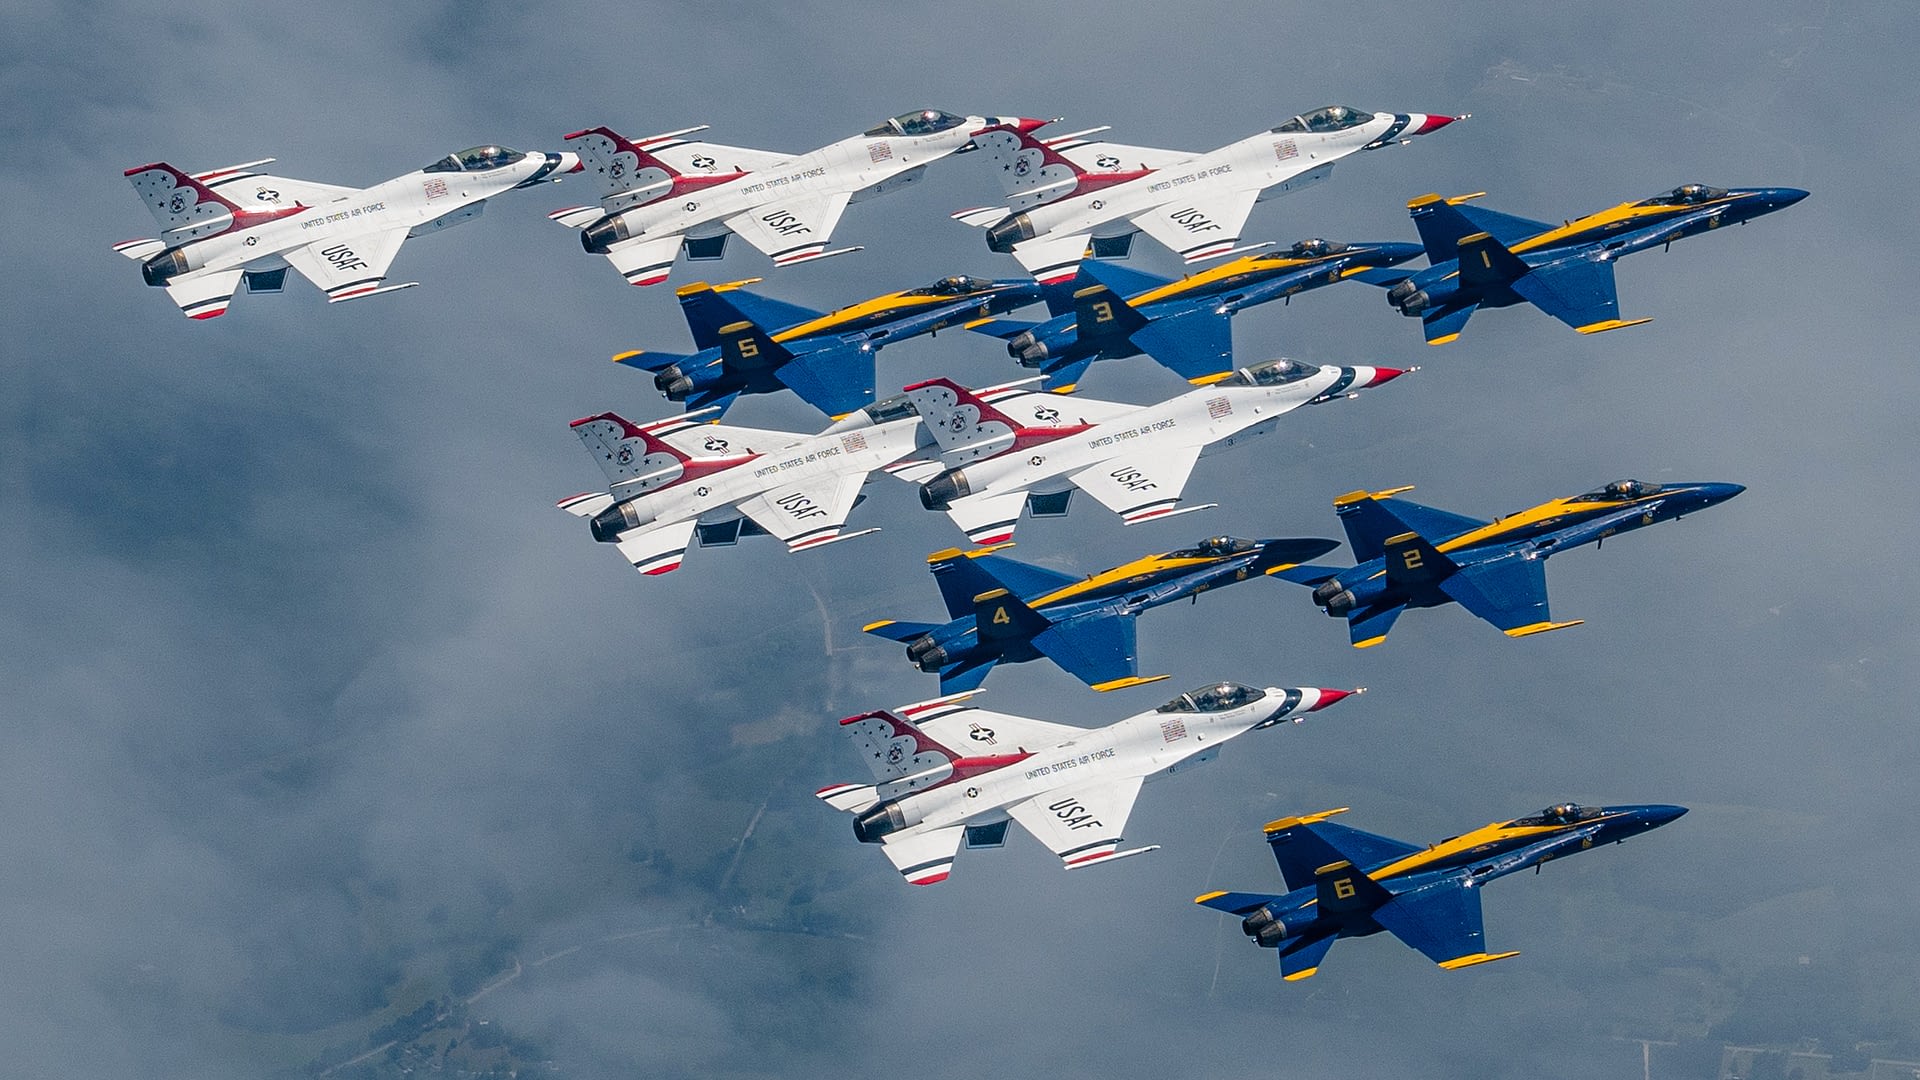 Check Out These Incredible Aerial Images Of The Blue Angels And